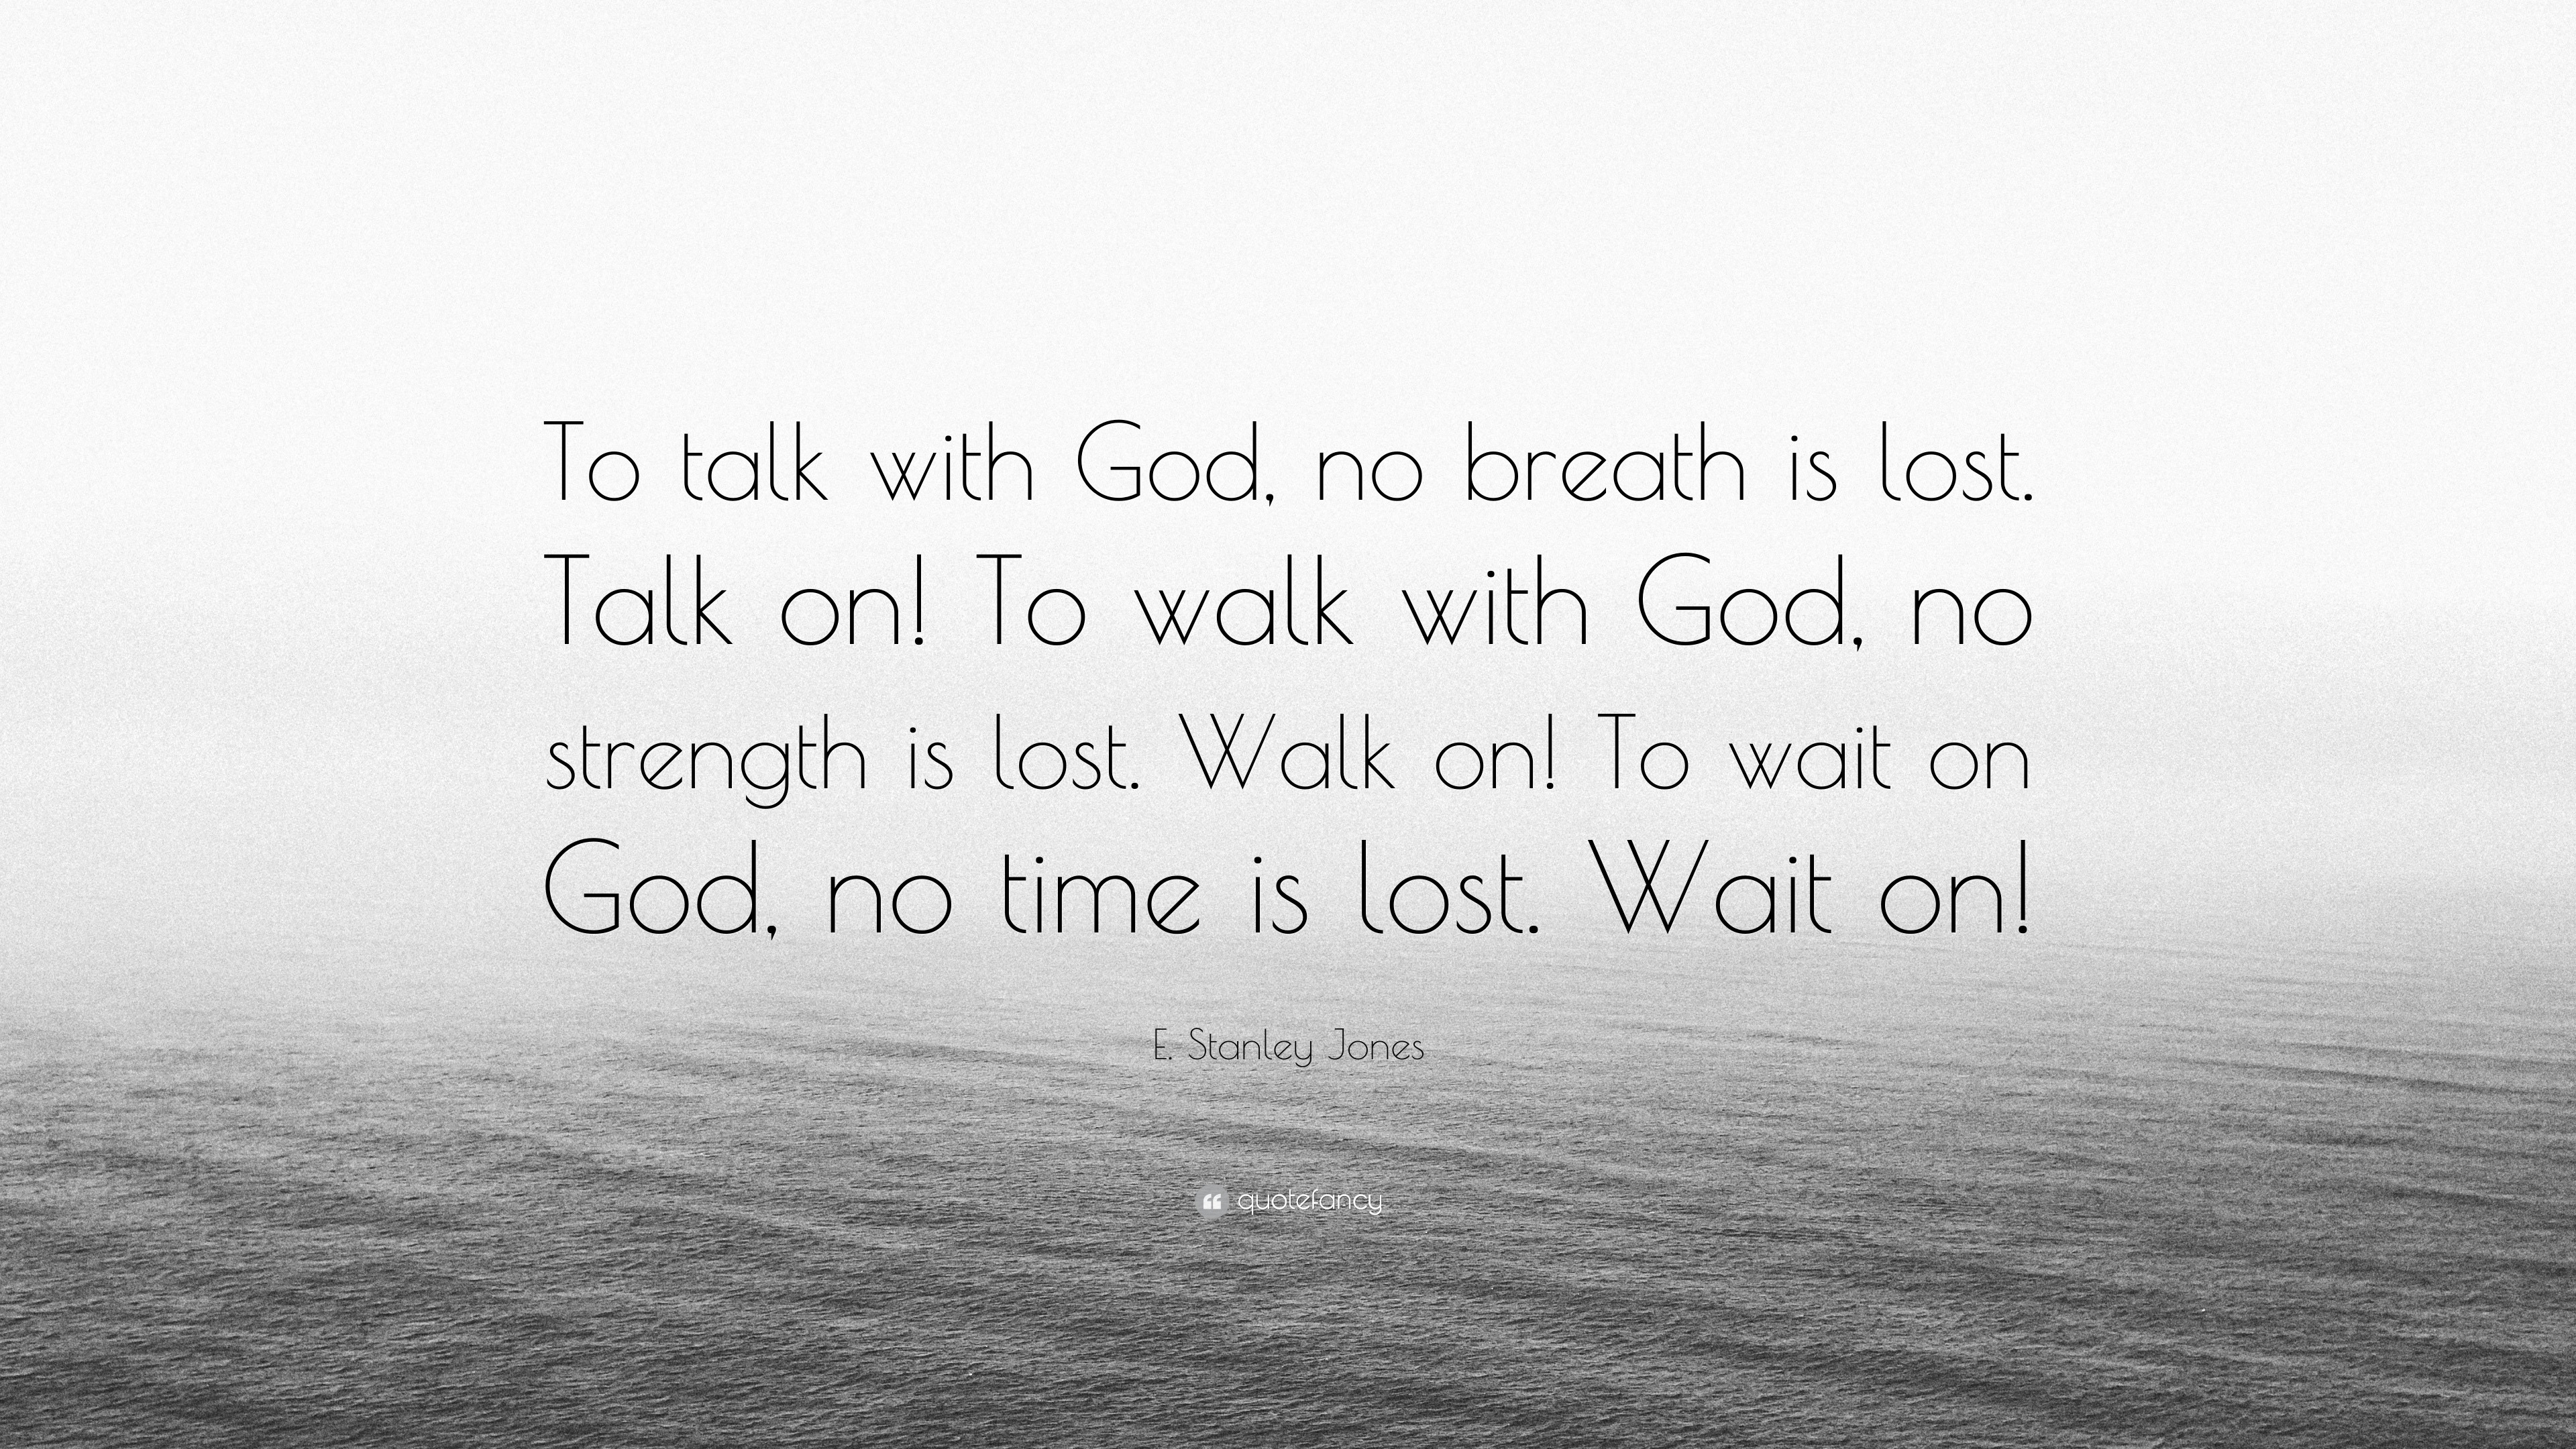 Lost Your Edge? - Walk With God